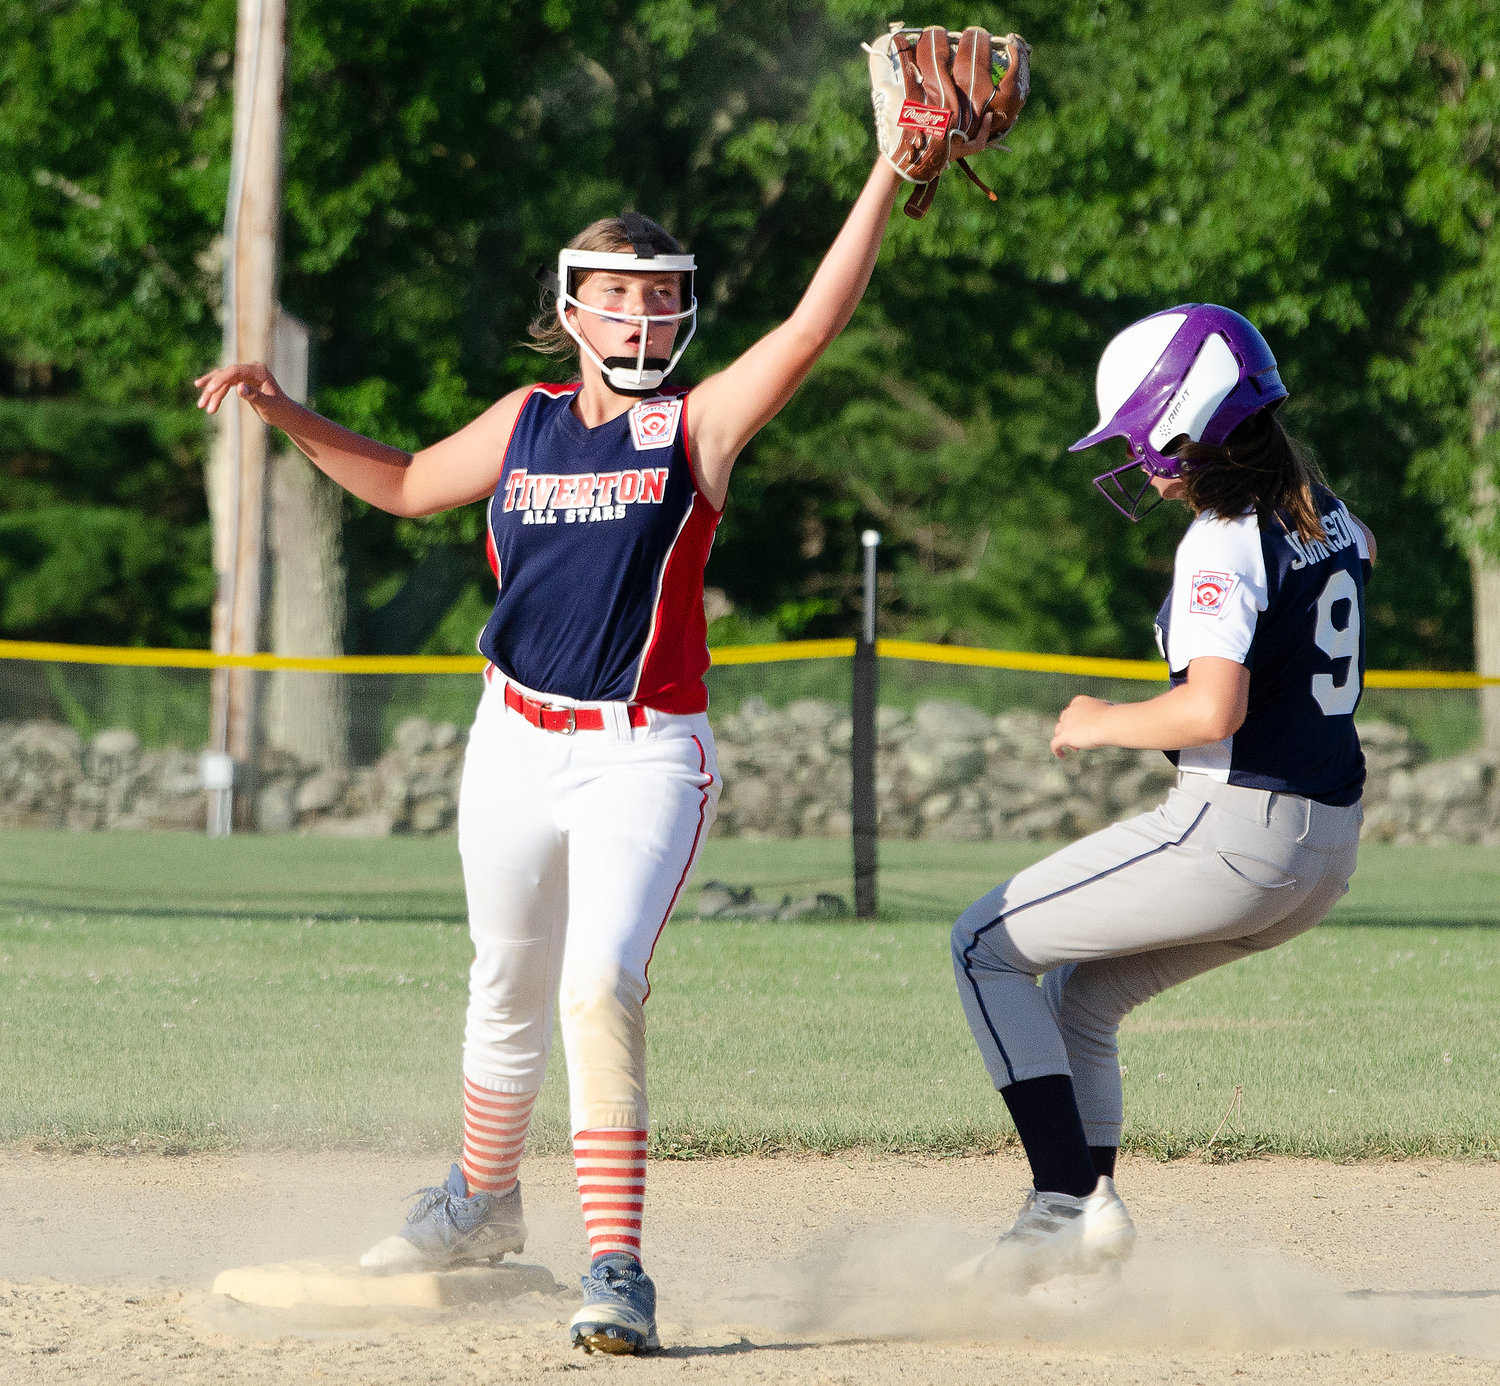 Second baseman Brooke Sowa catches a throw from Kaylyn Aubuchon for an out at second base.